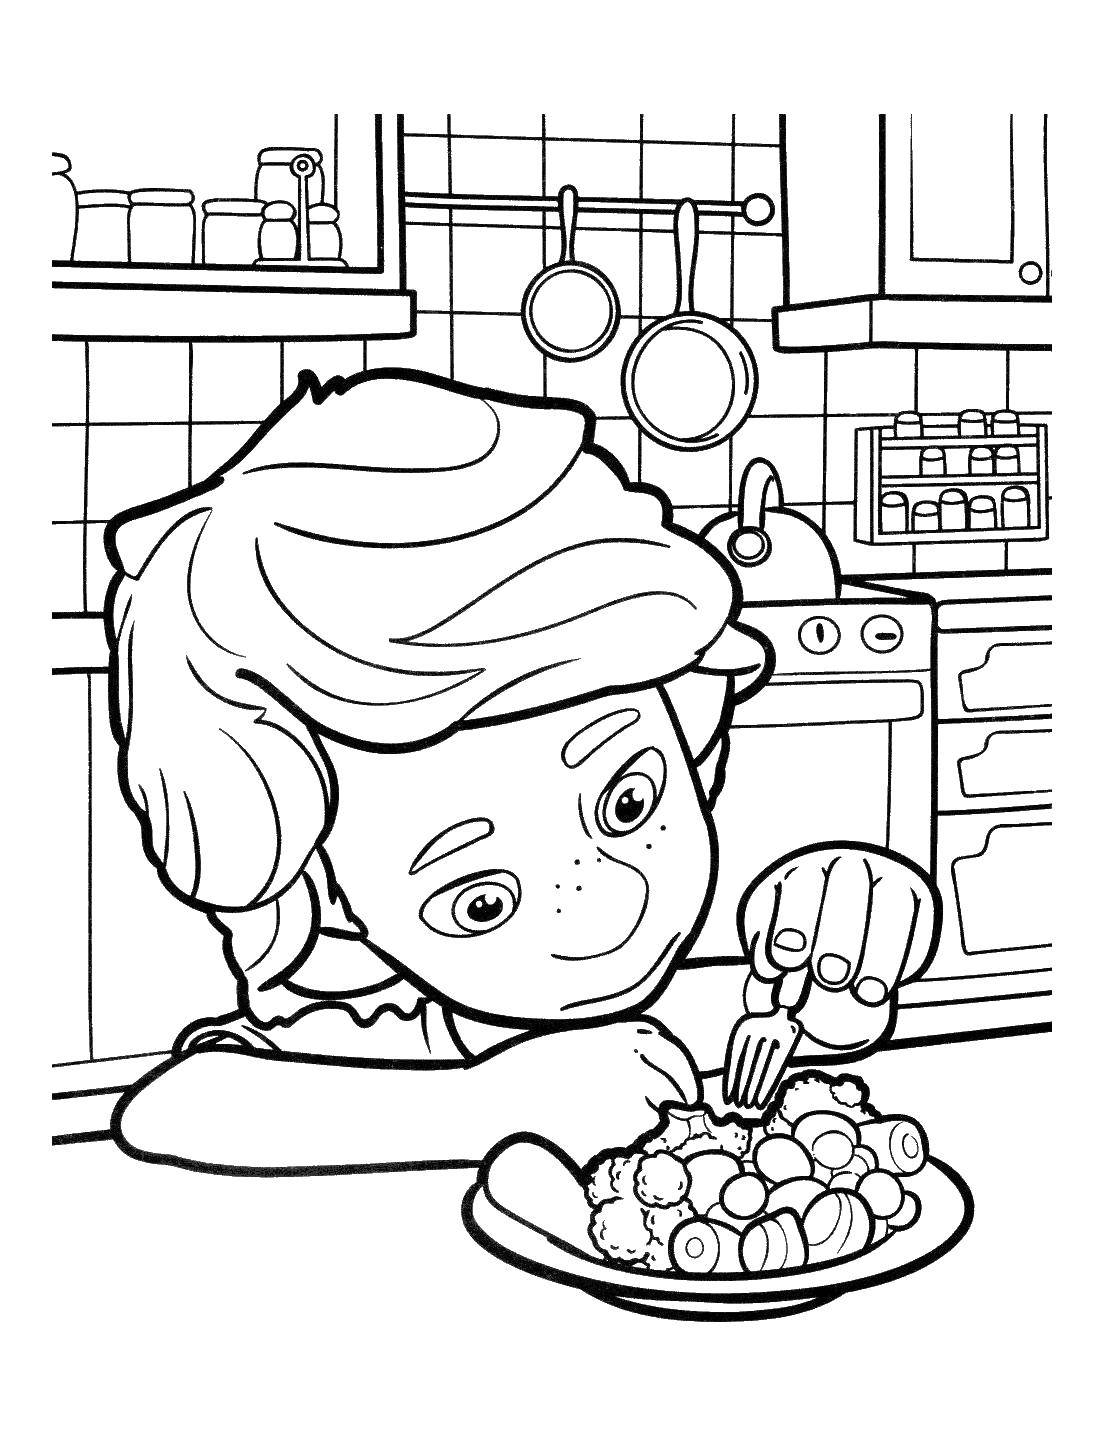 Coloring Dimdimich eats. Category fixico. Tags:  fixico.